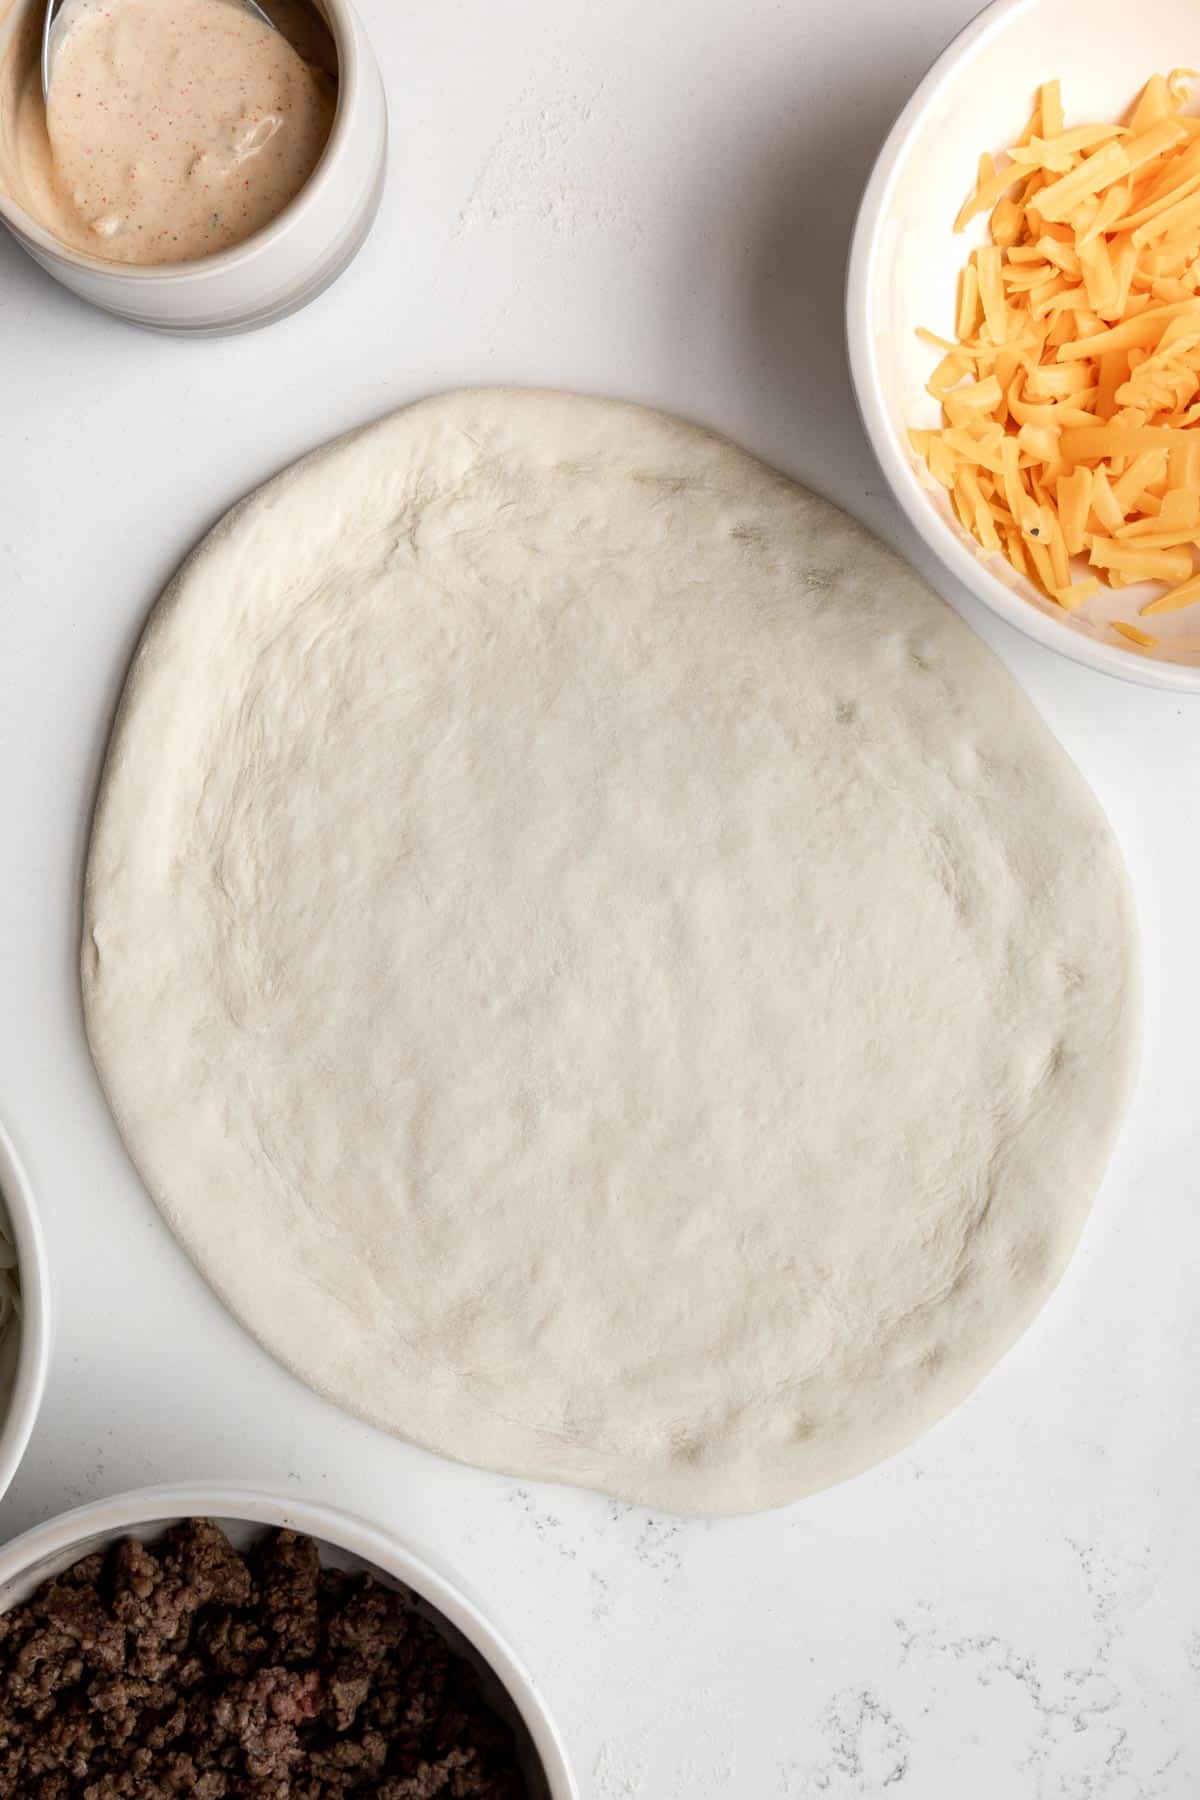 pizza dough stretched on a table with ingredients around it.